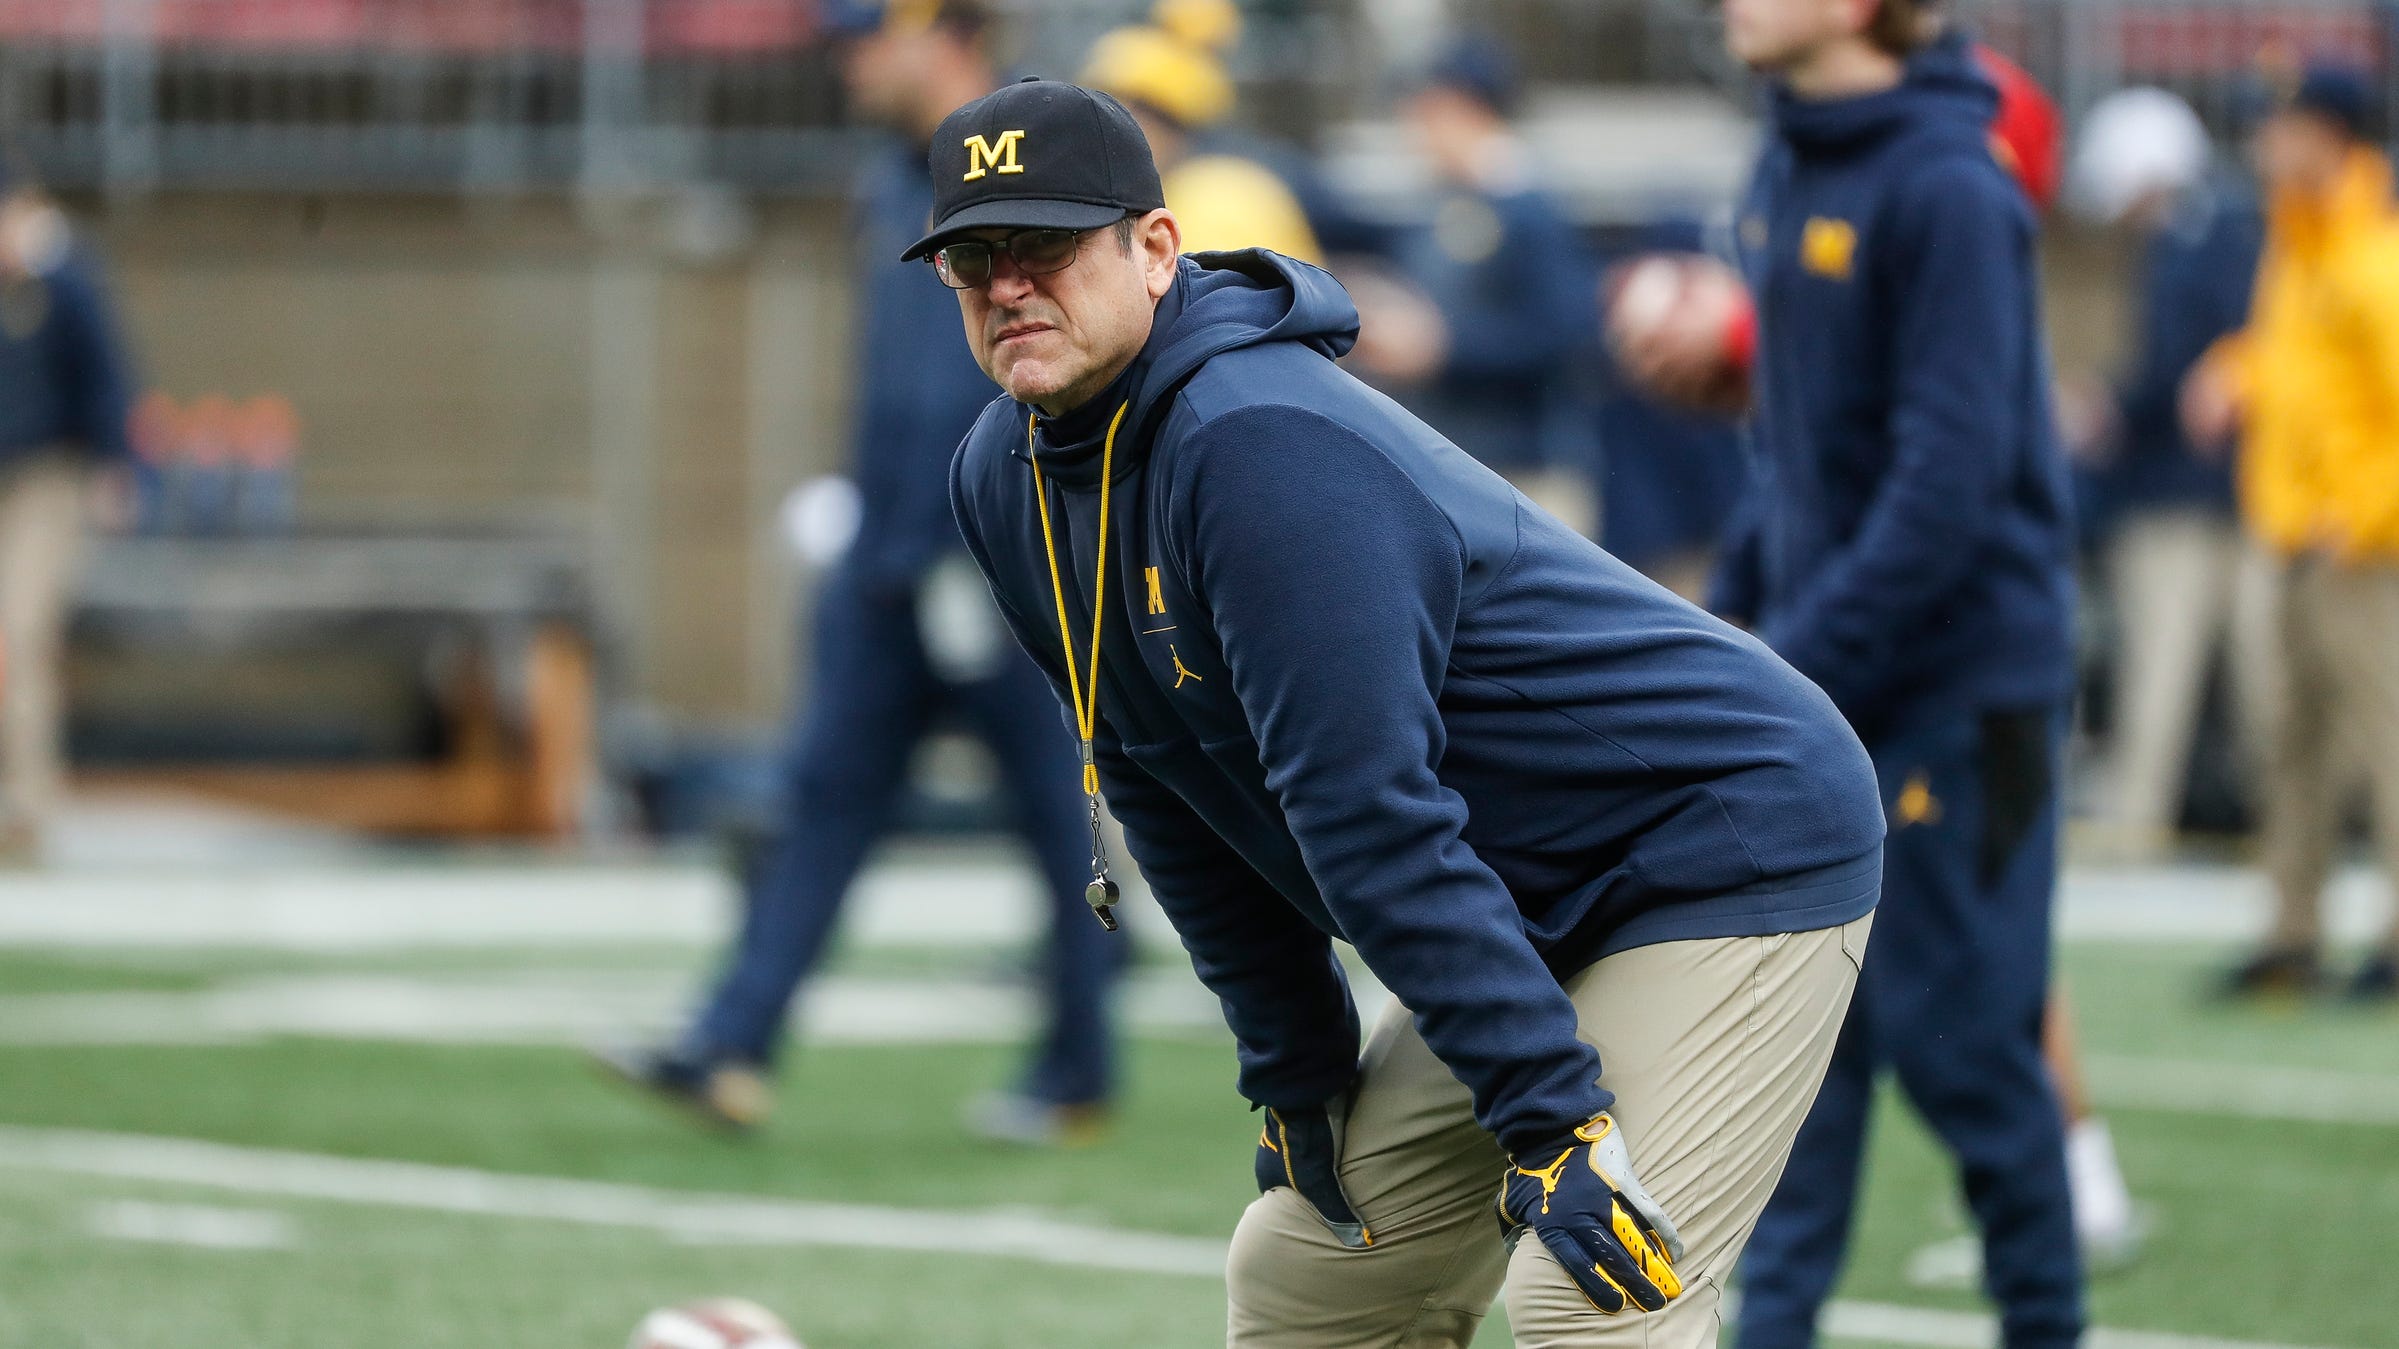 michigan-football-recruiting-still-has-irons-in-the-fire